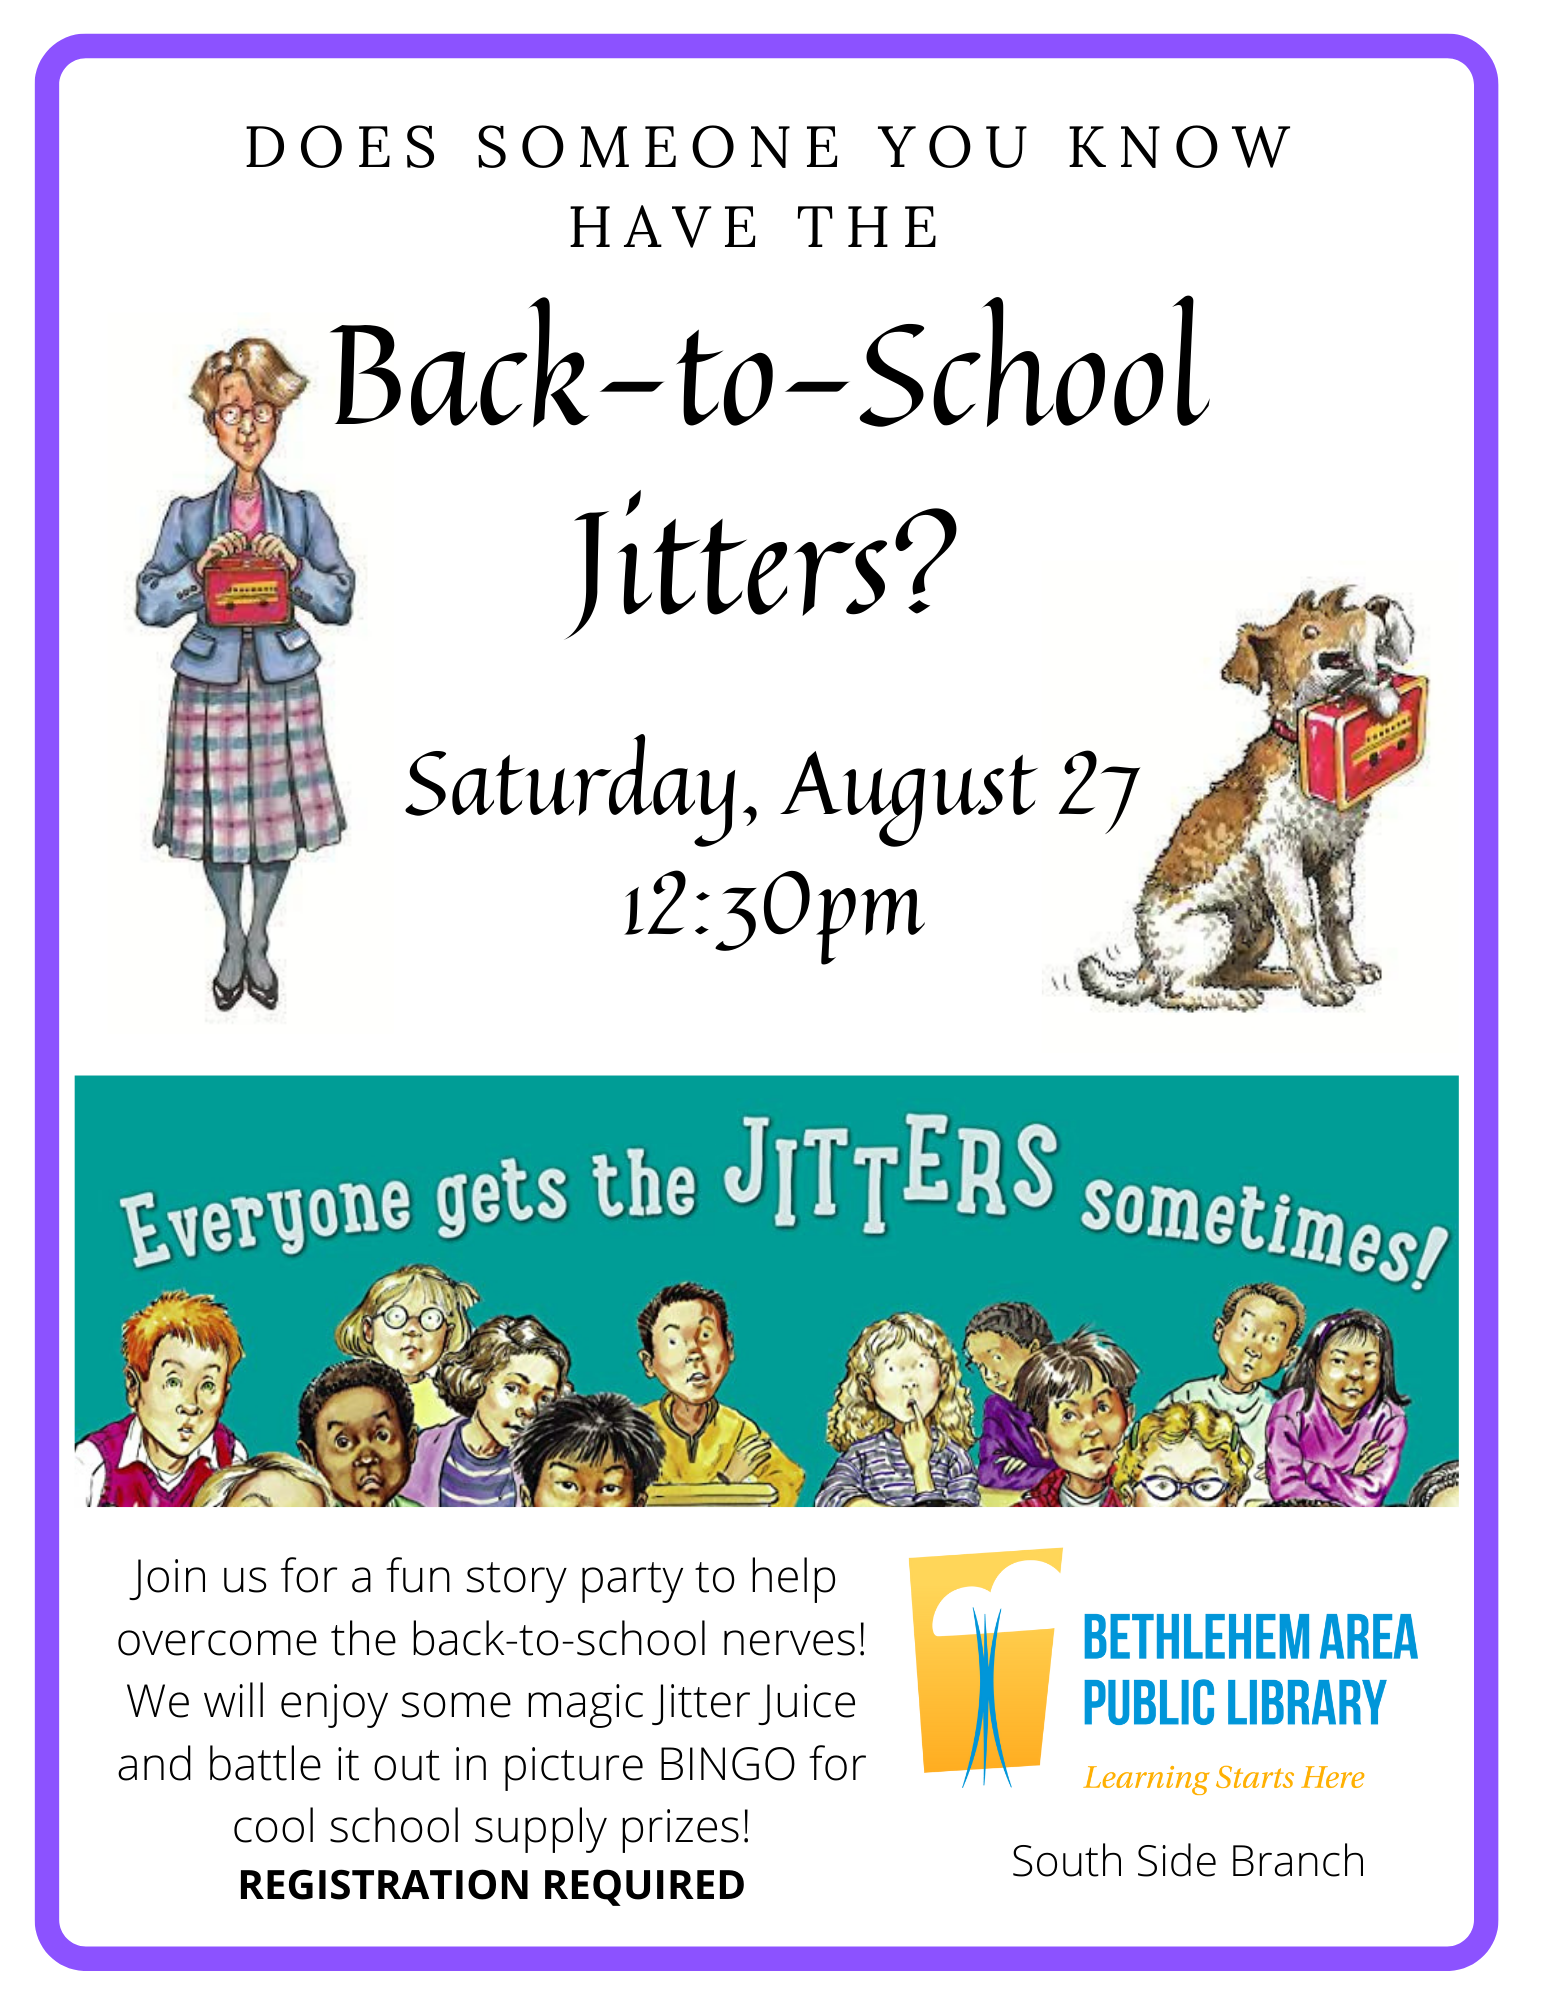 Back-to-School Jitters Party at South Side!